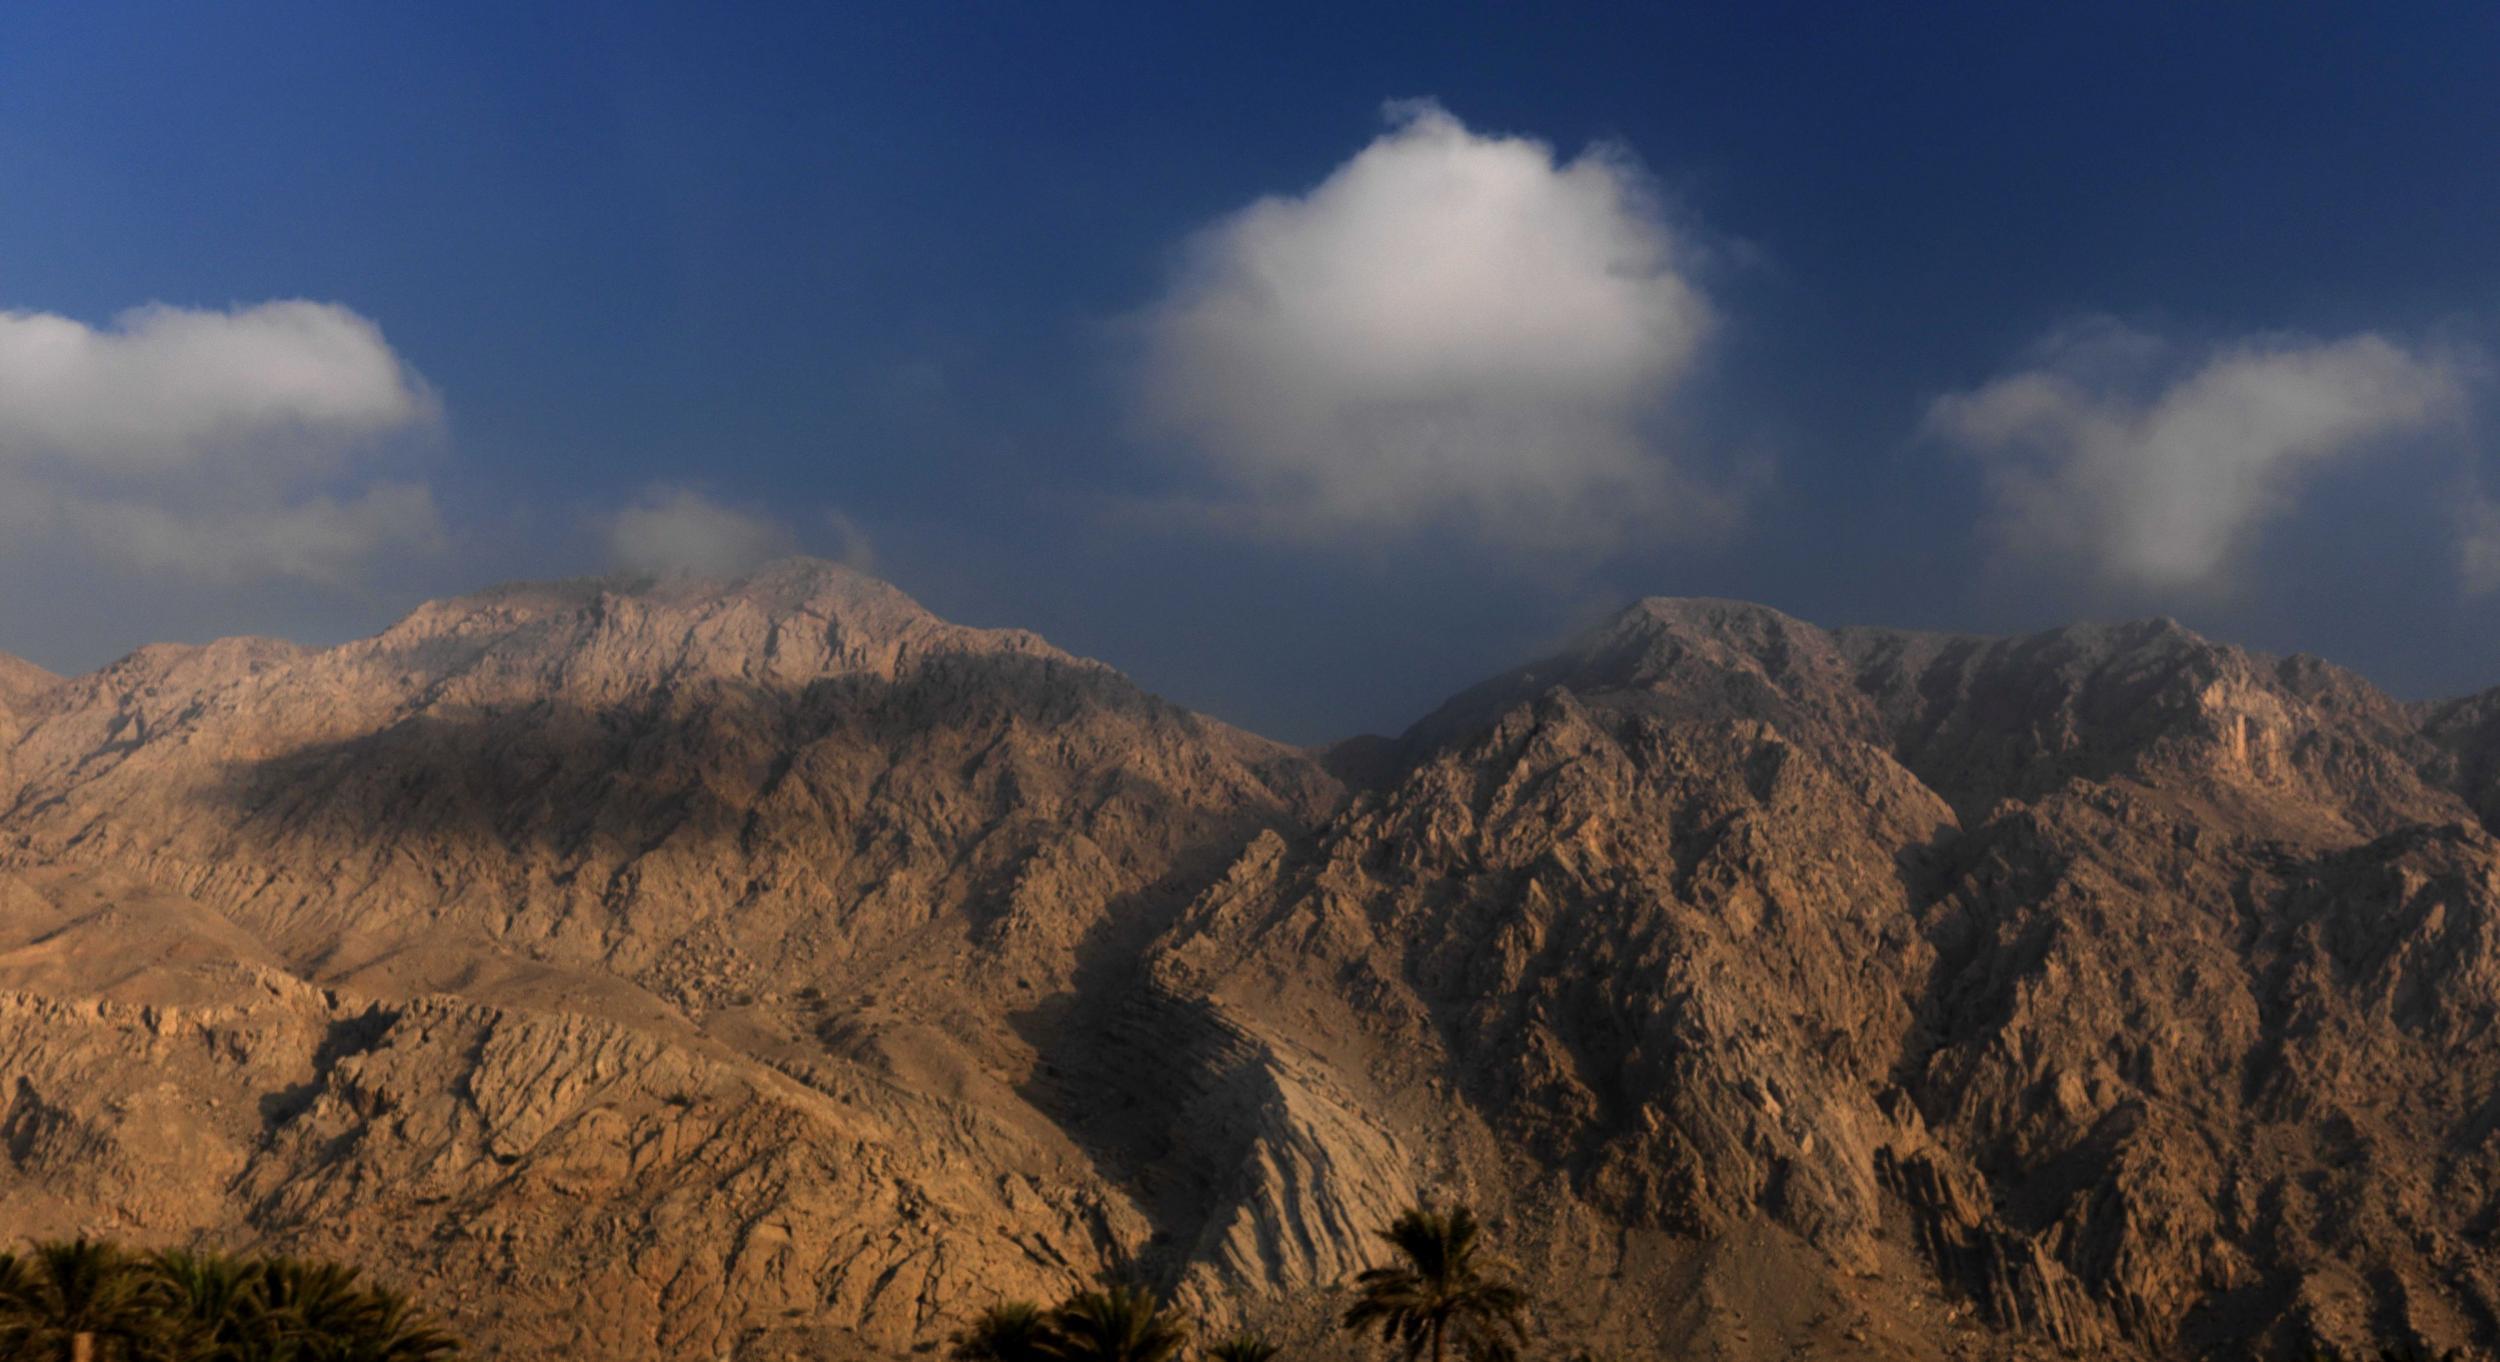 Jebel Jais is the highest mountain in the UAE